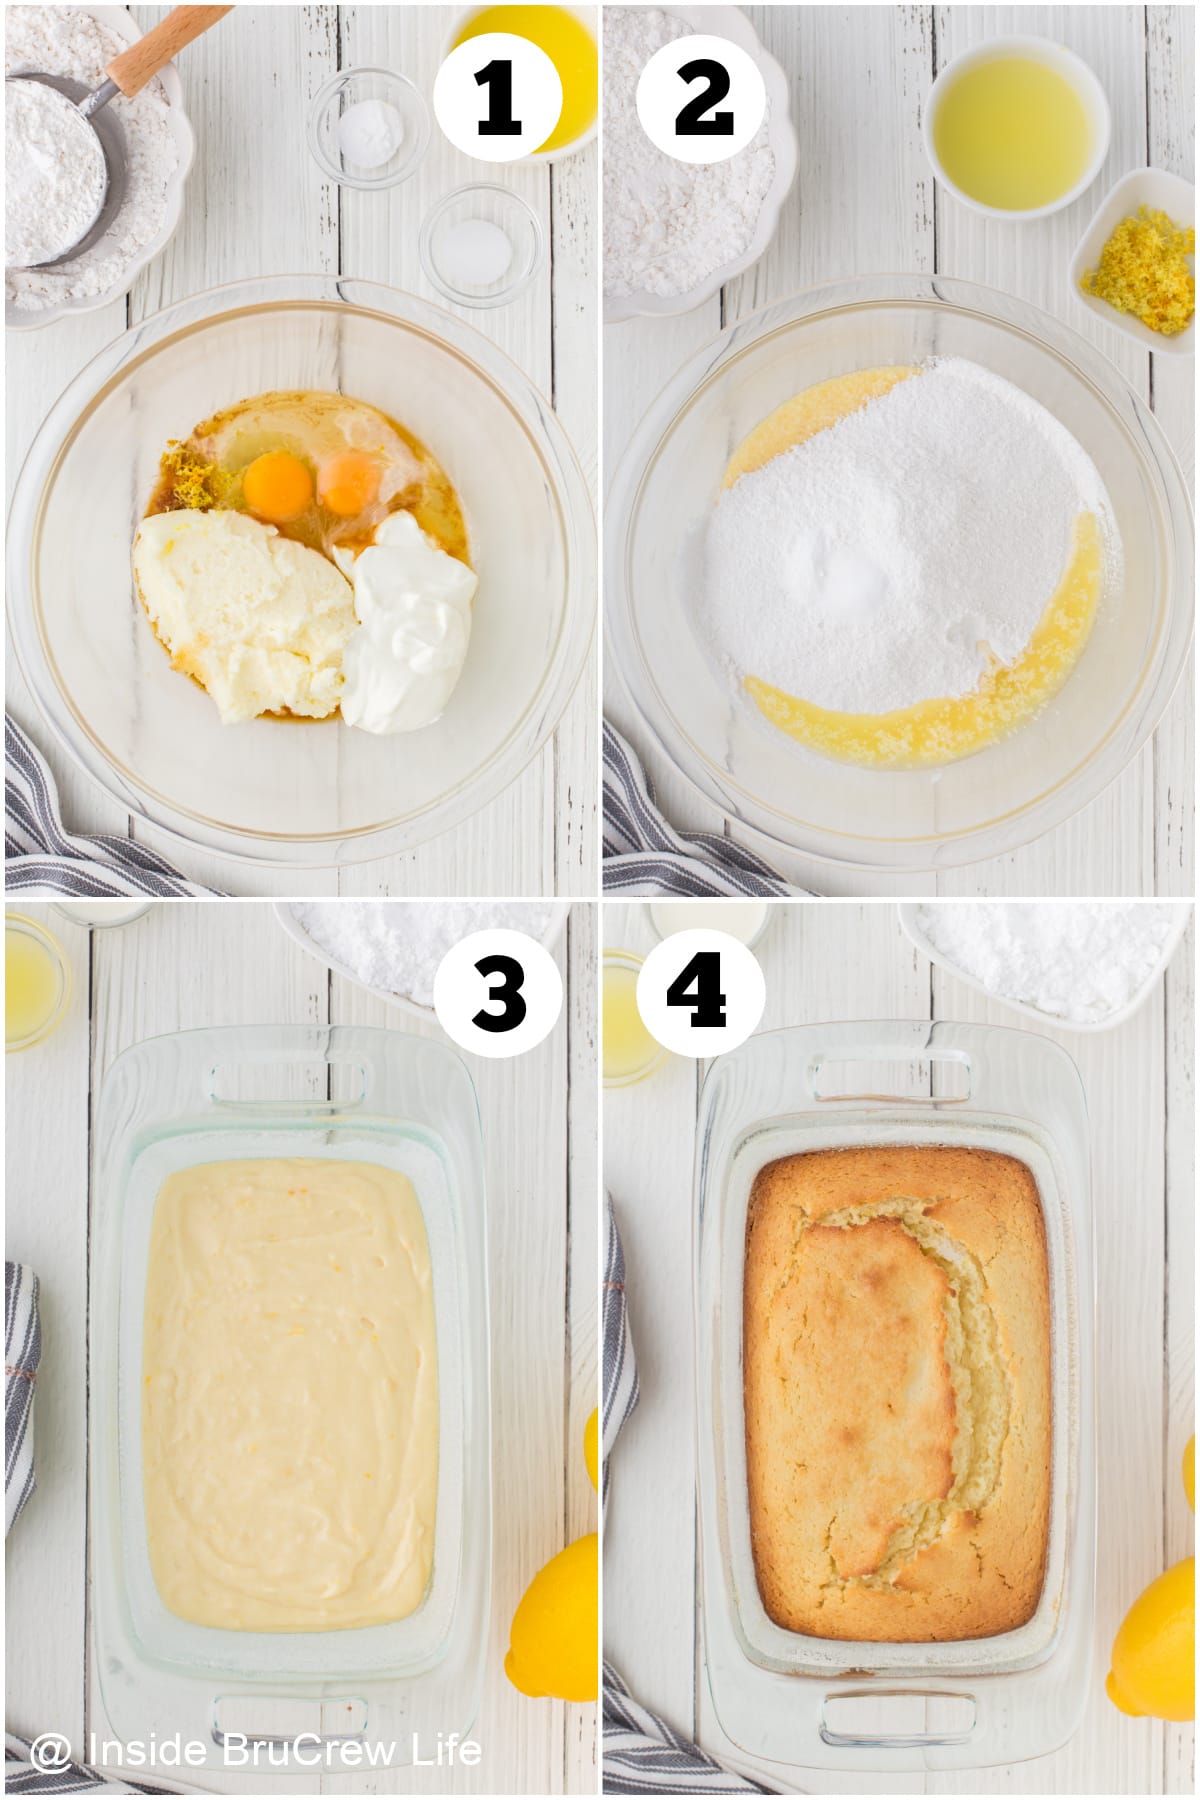 Four pictures collaged together showing how to make lemon bread.